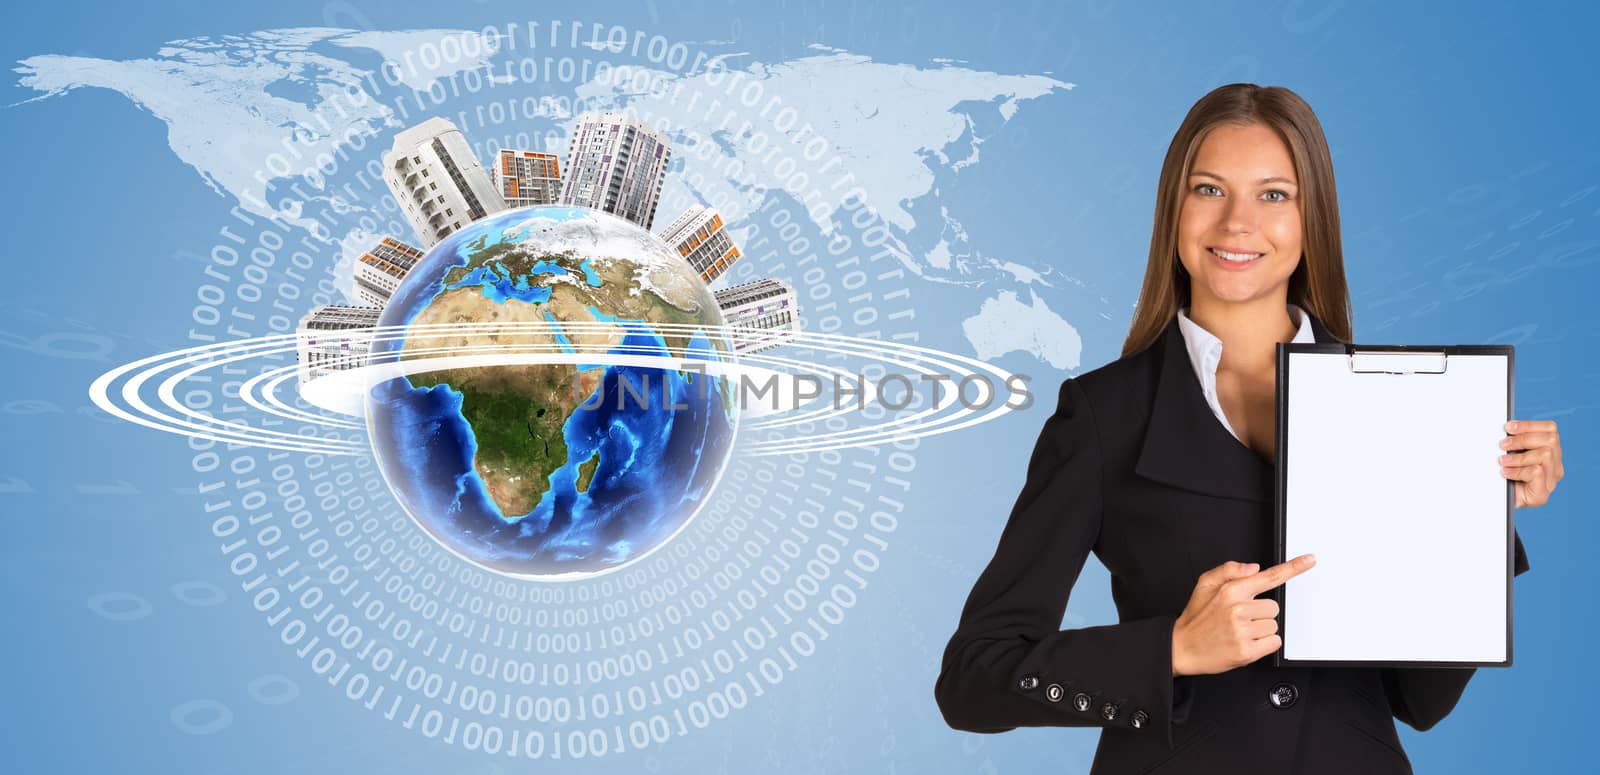 Beautiful businesswoman in suit holding paper holder. Earth with buildings and figures in background. Elements of this image furnished by NASA